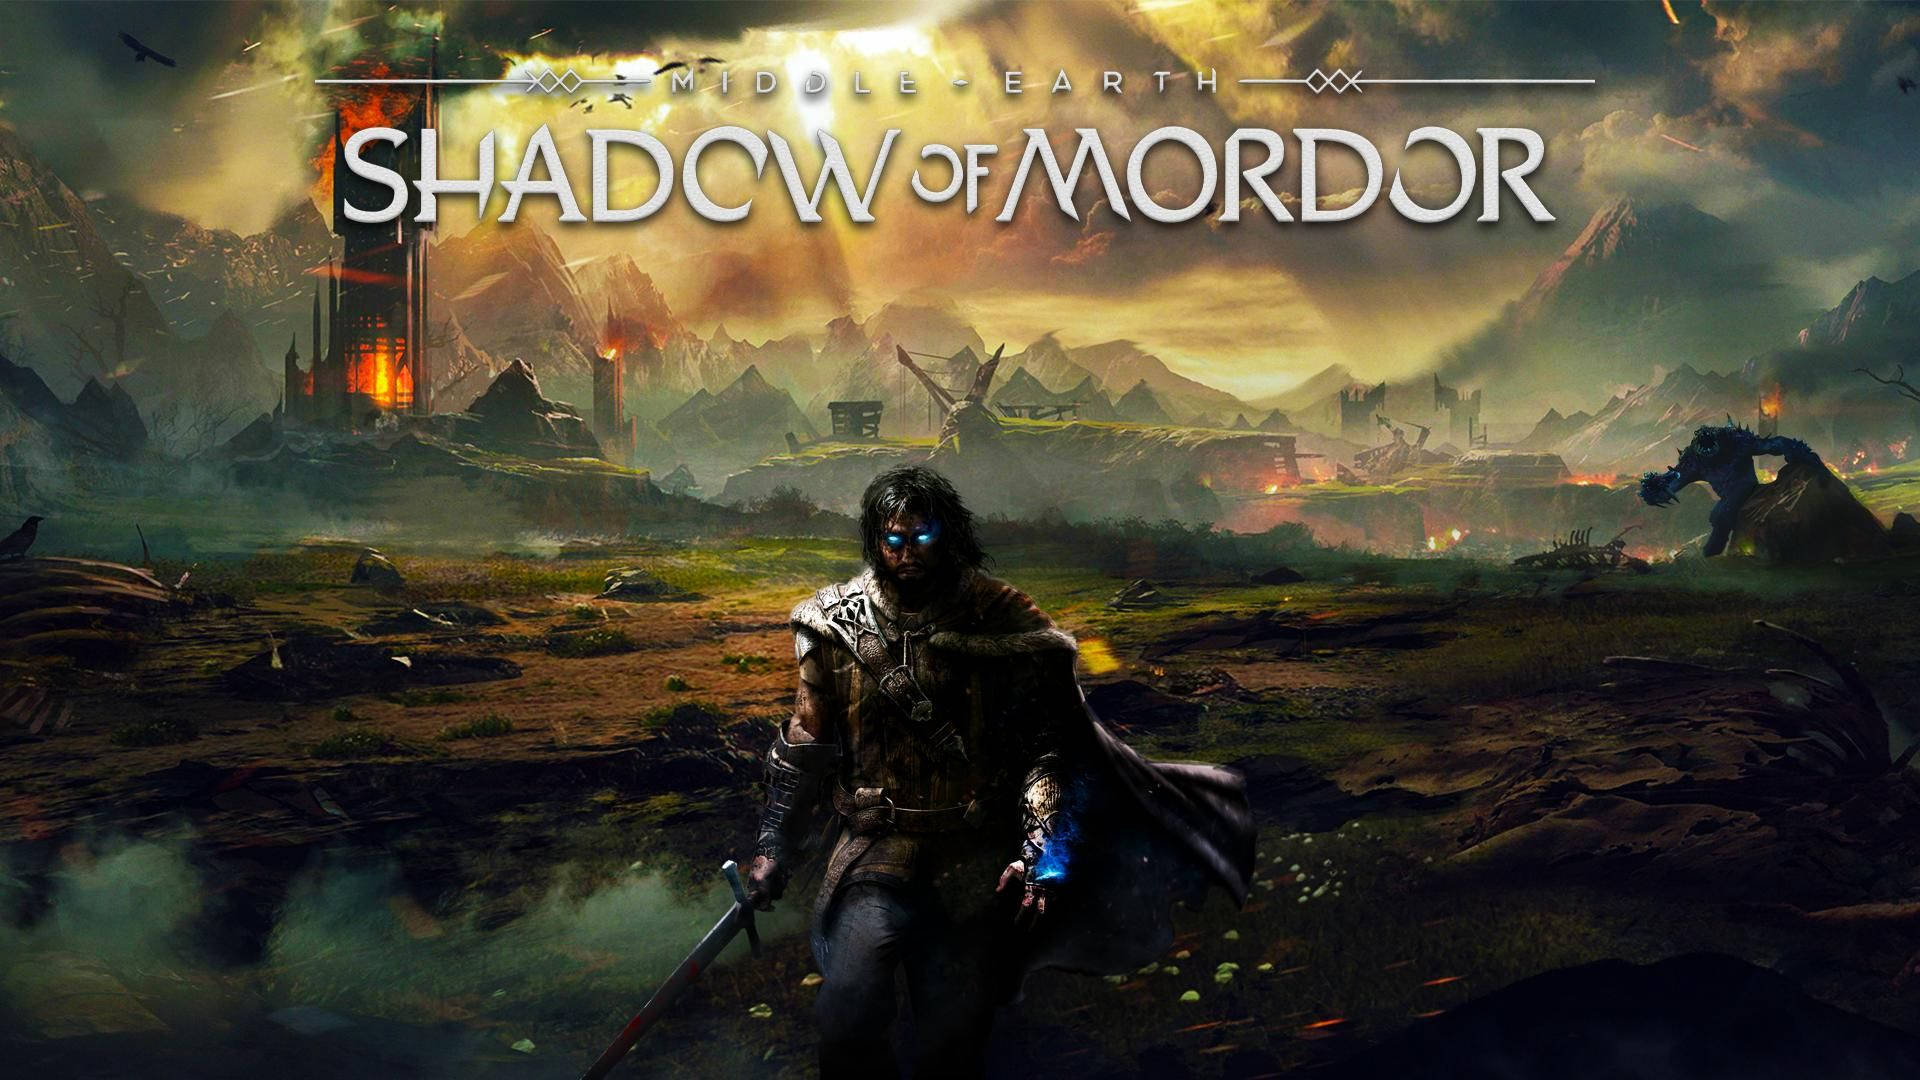 Middle-earth: Shadow of Mordor [2] wallpaper - Game wallpapers